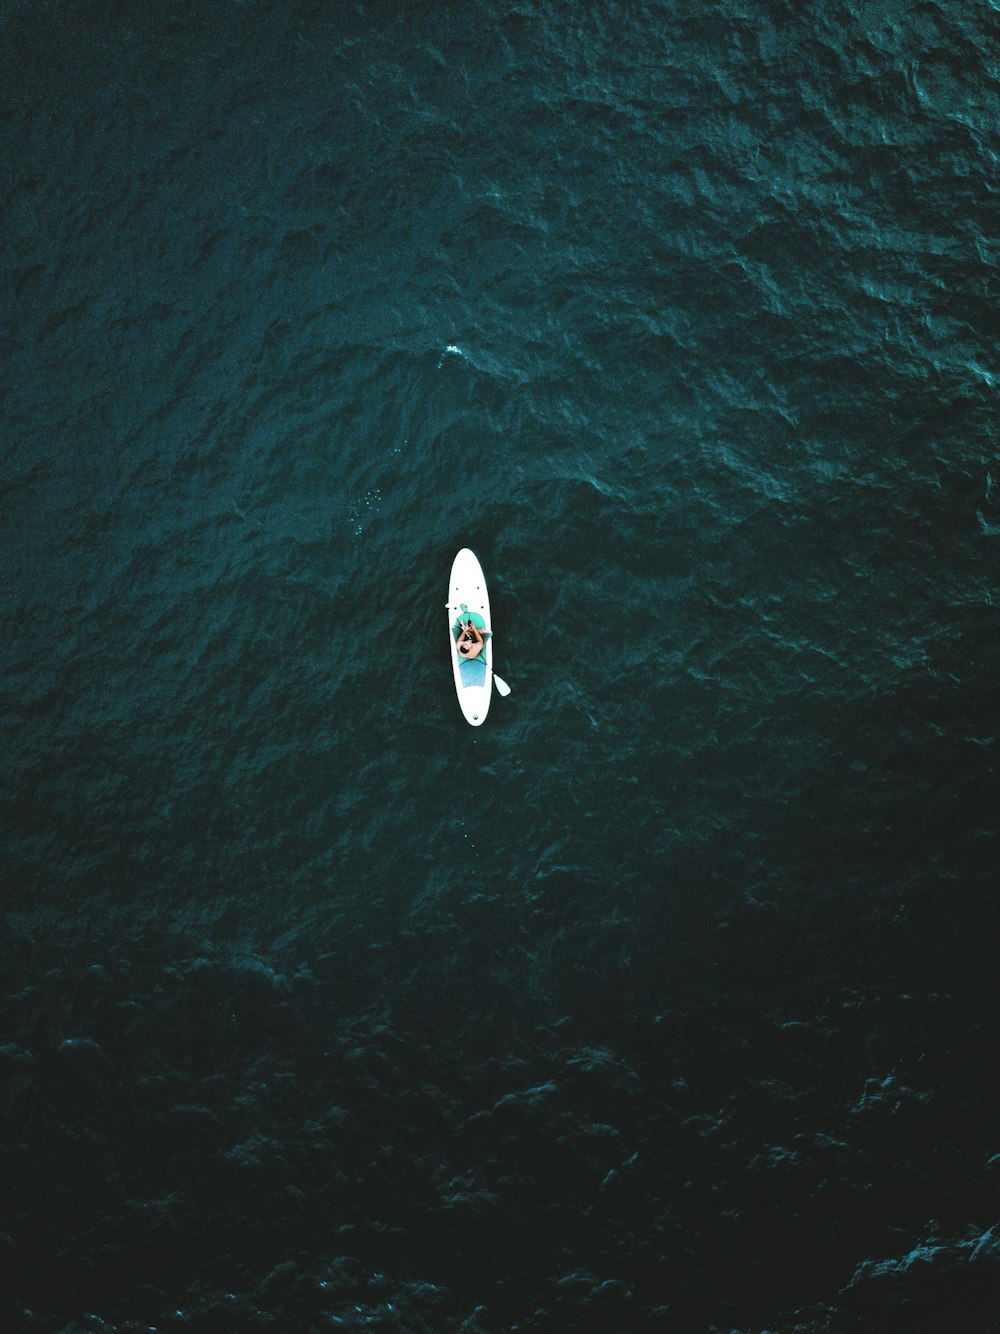 bird's-eye view of person riding in kayak on body of water